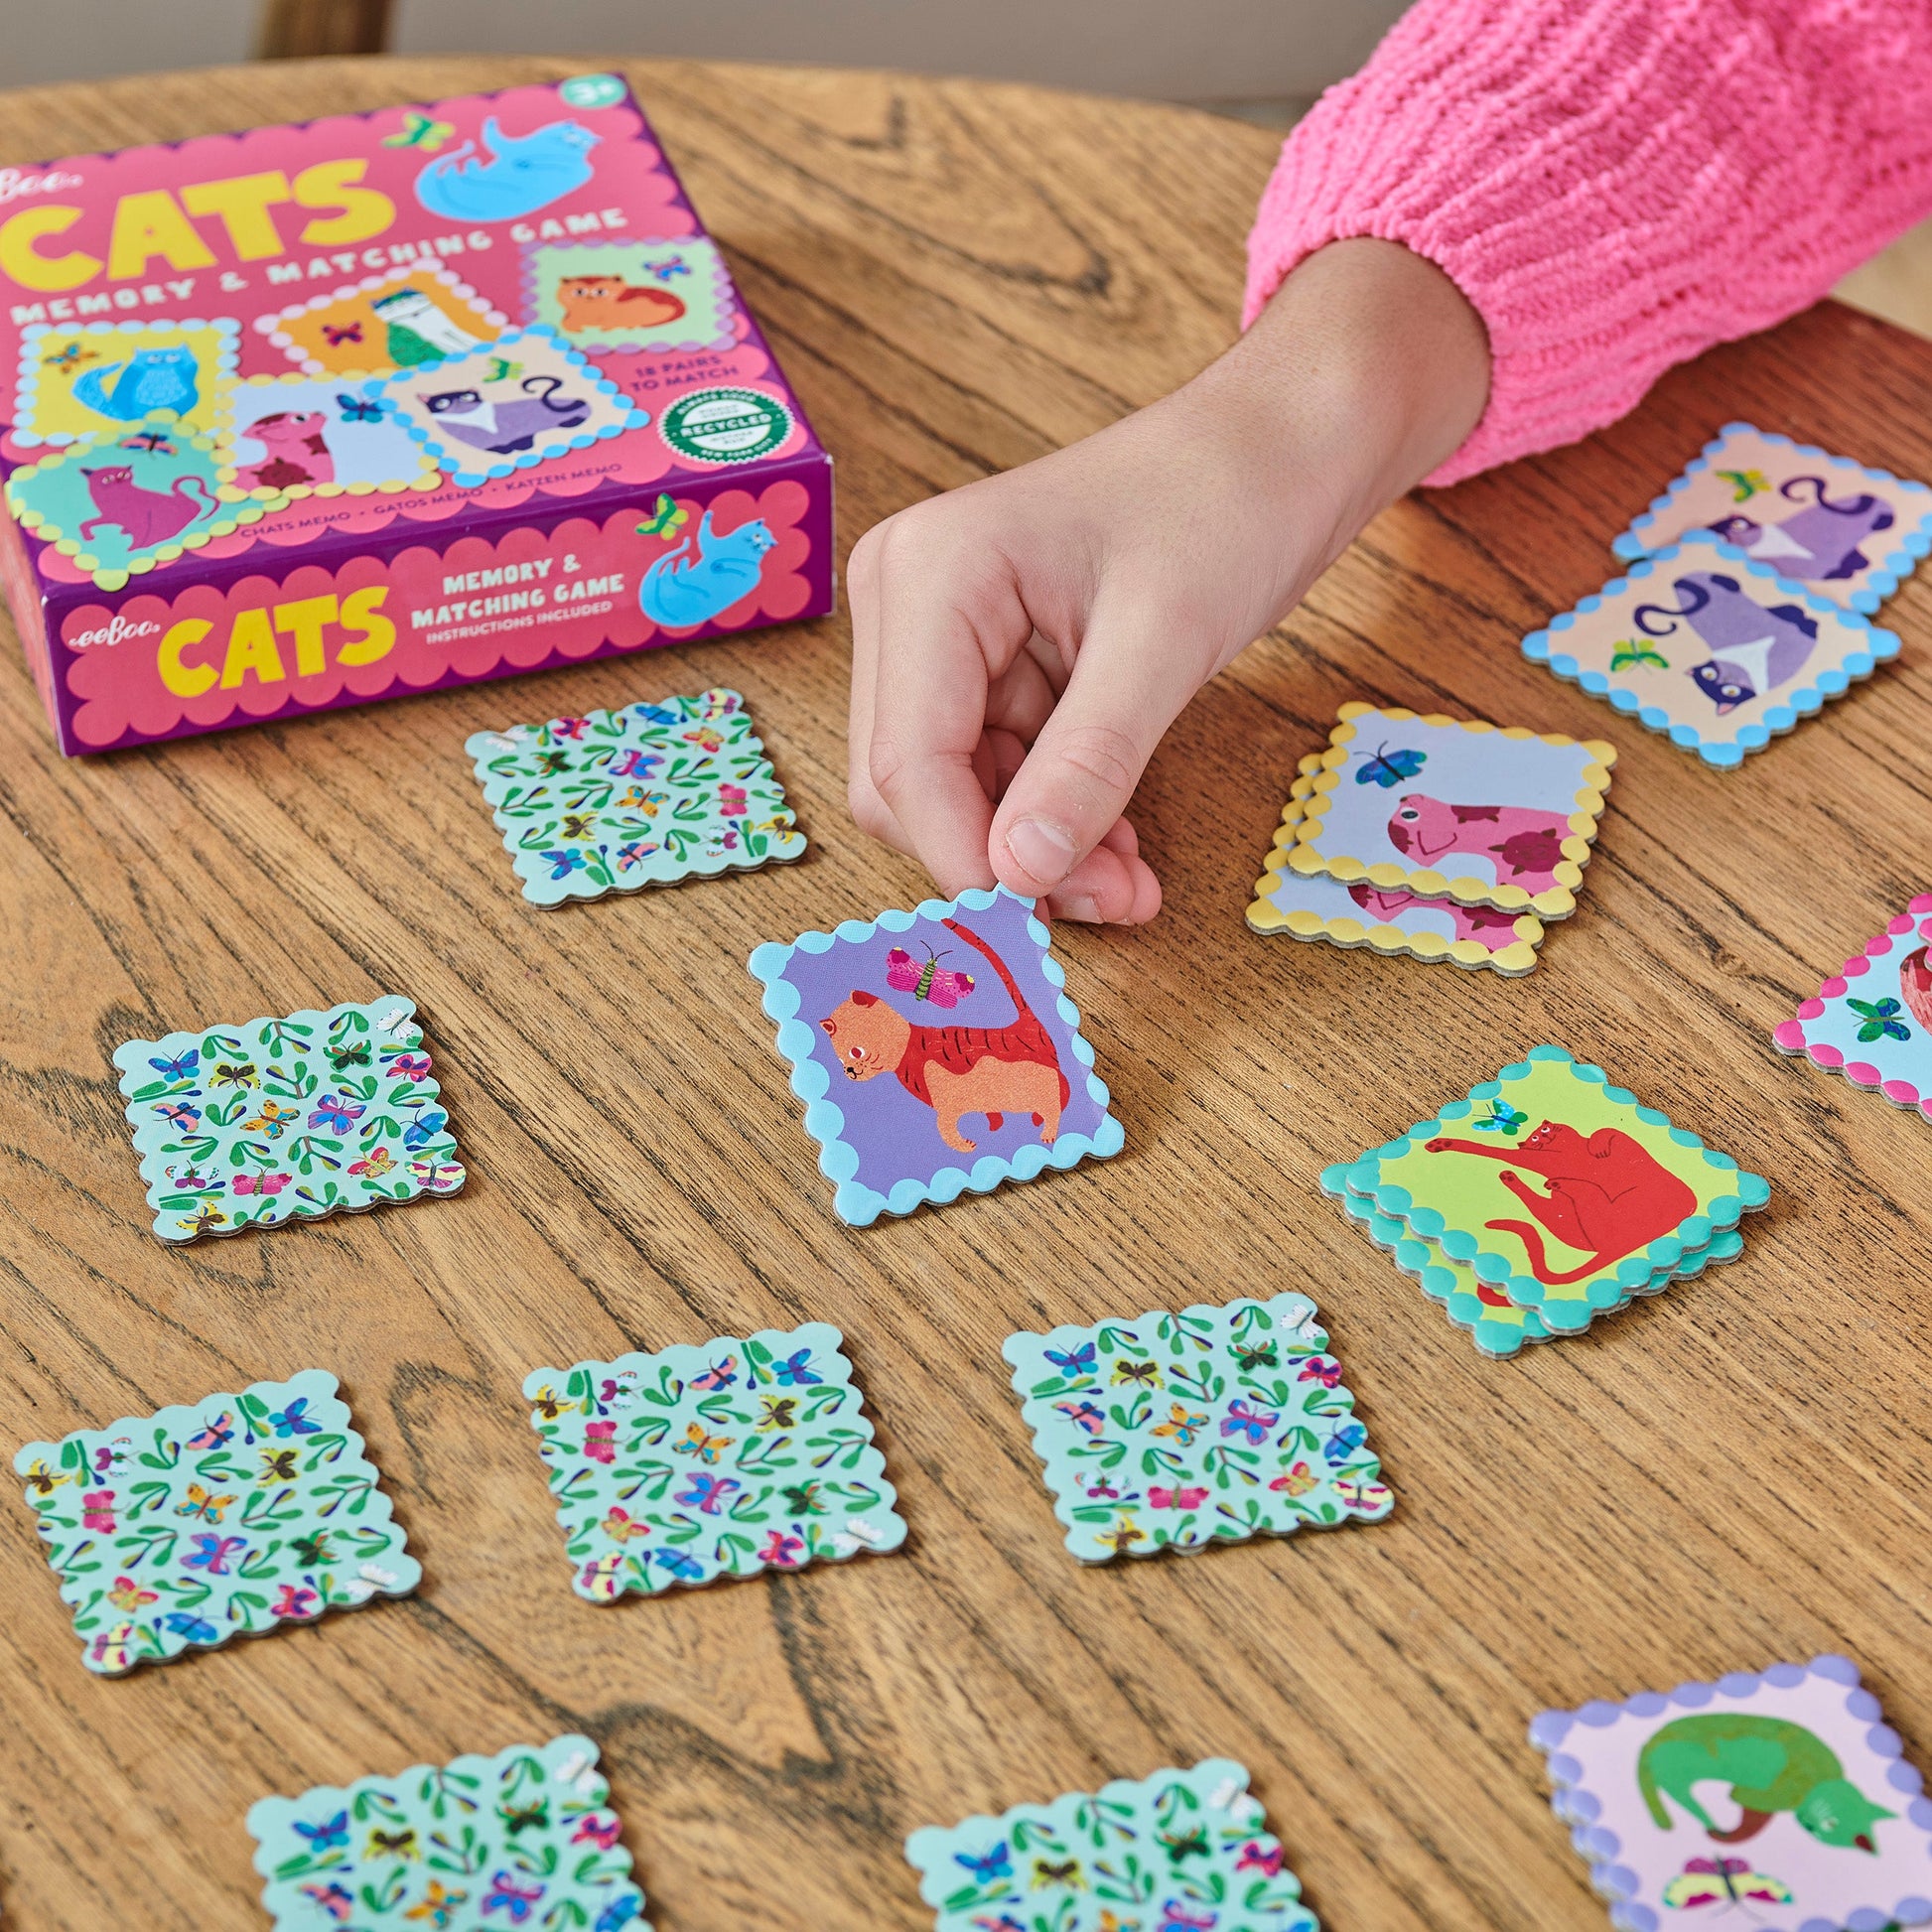 Cats Little Square Memory Matching Game | Fun Unique Gifts for Kids 3+